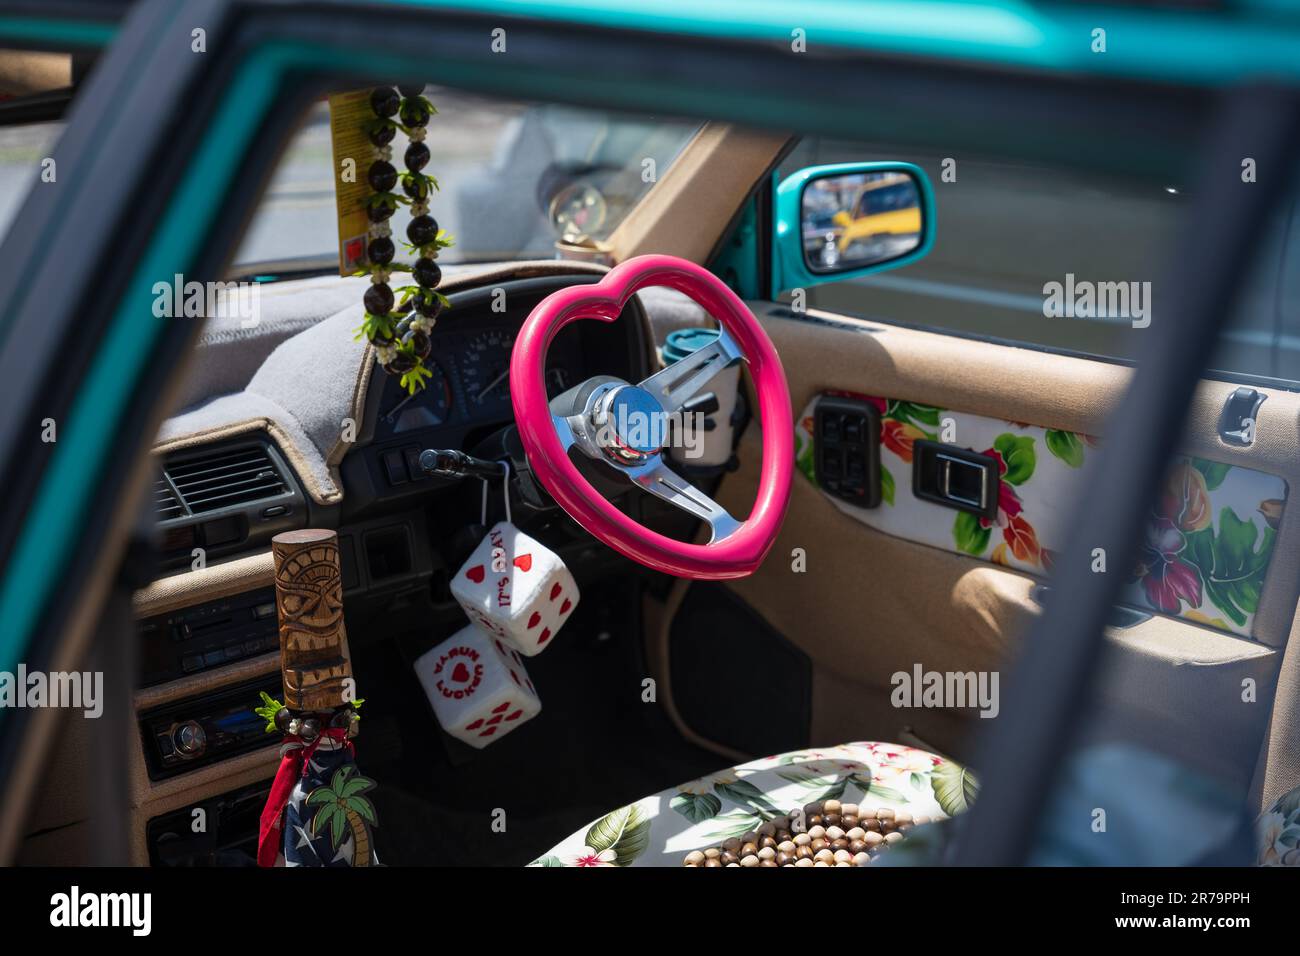 An interior shot of a decorated Japanese sports car. Stock Photo